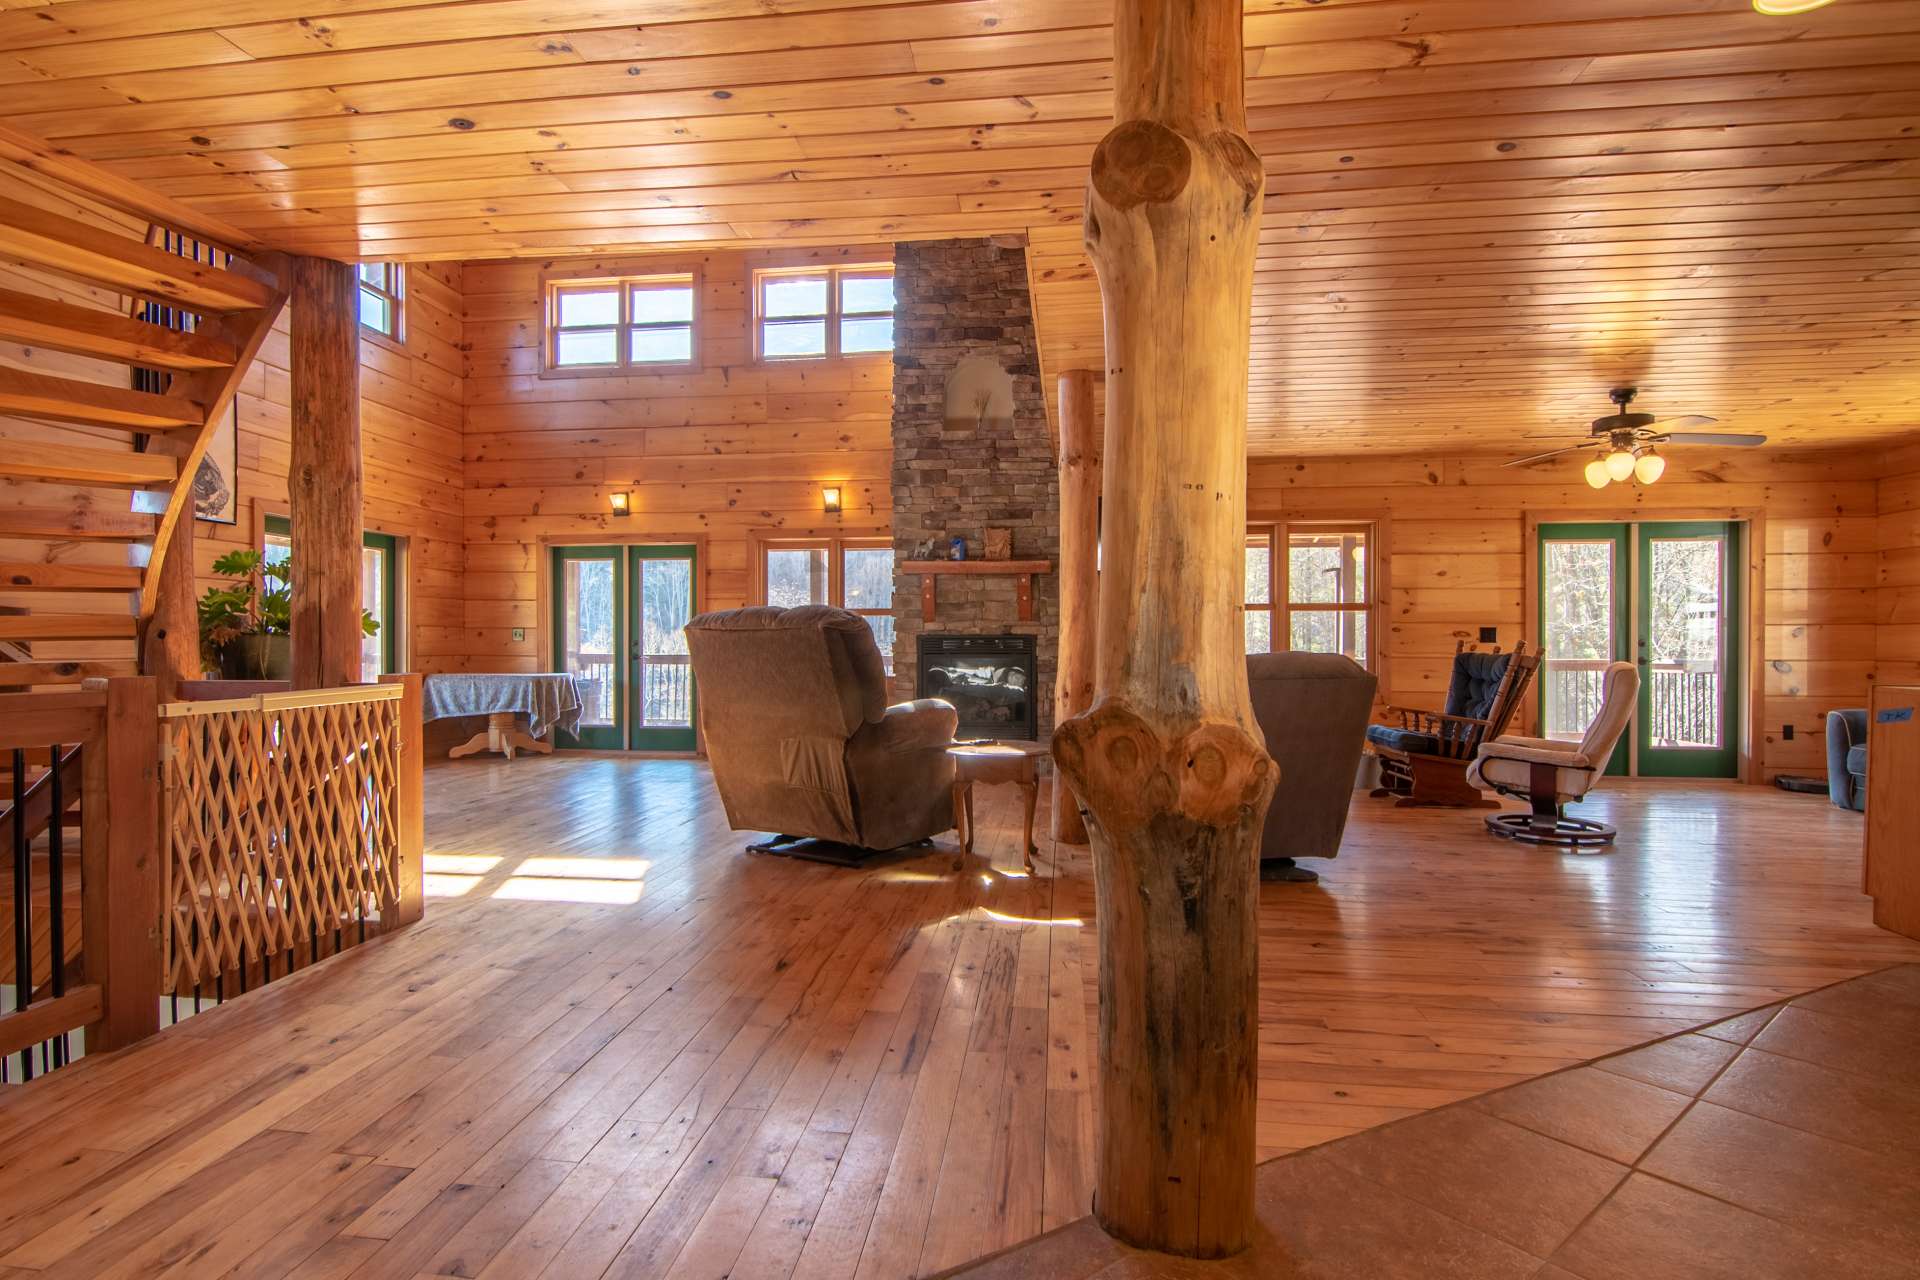 A soaring two story stone fireplace with gas logs provides added warmth and ambiance on cool winter evenings.  Beautiful hardwood floors gleam with the light from all of the windows.